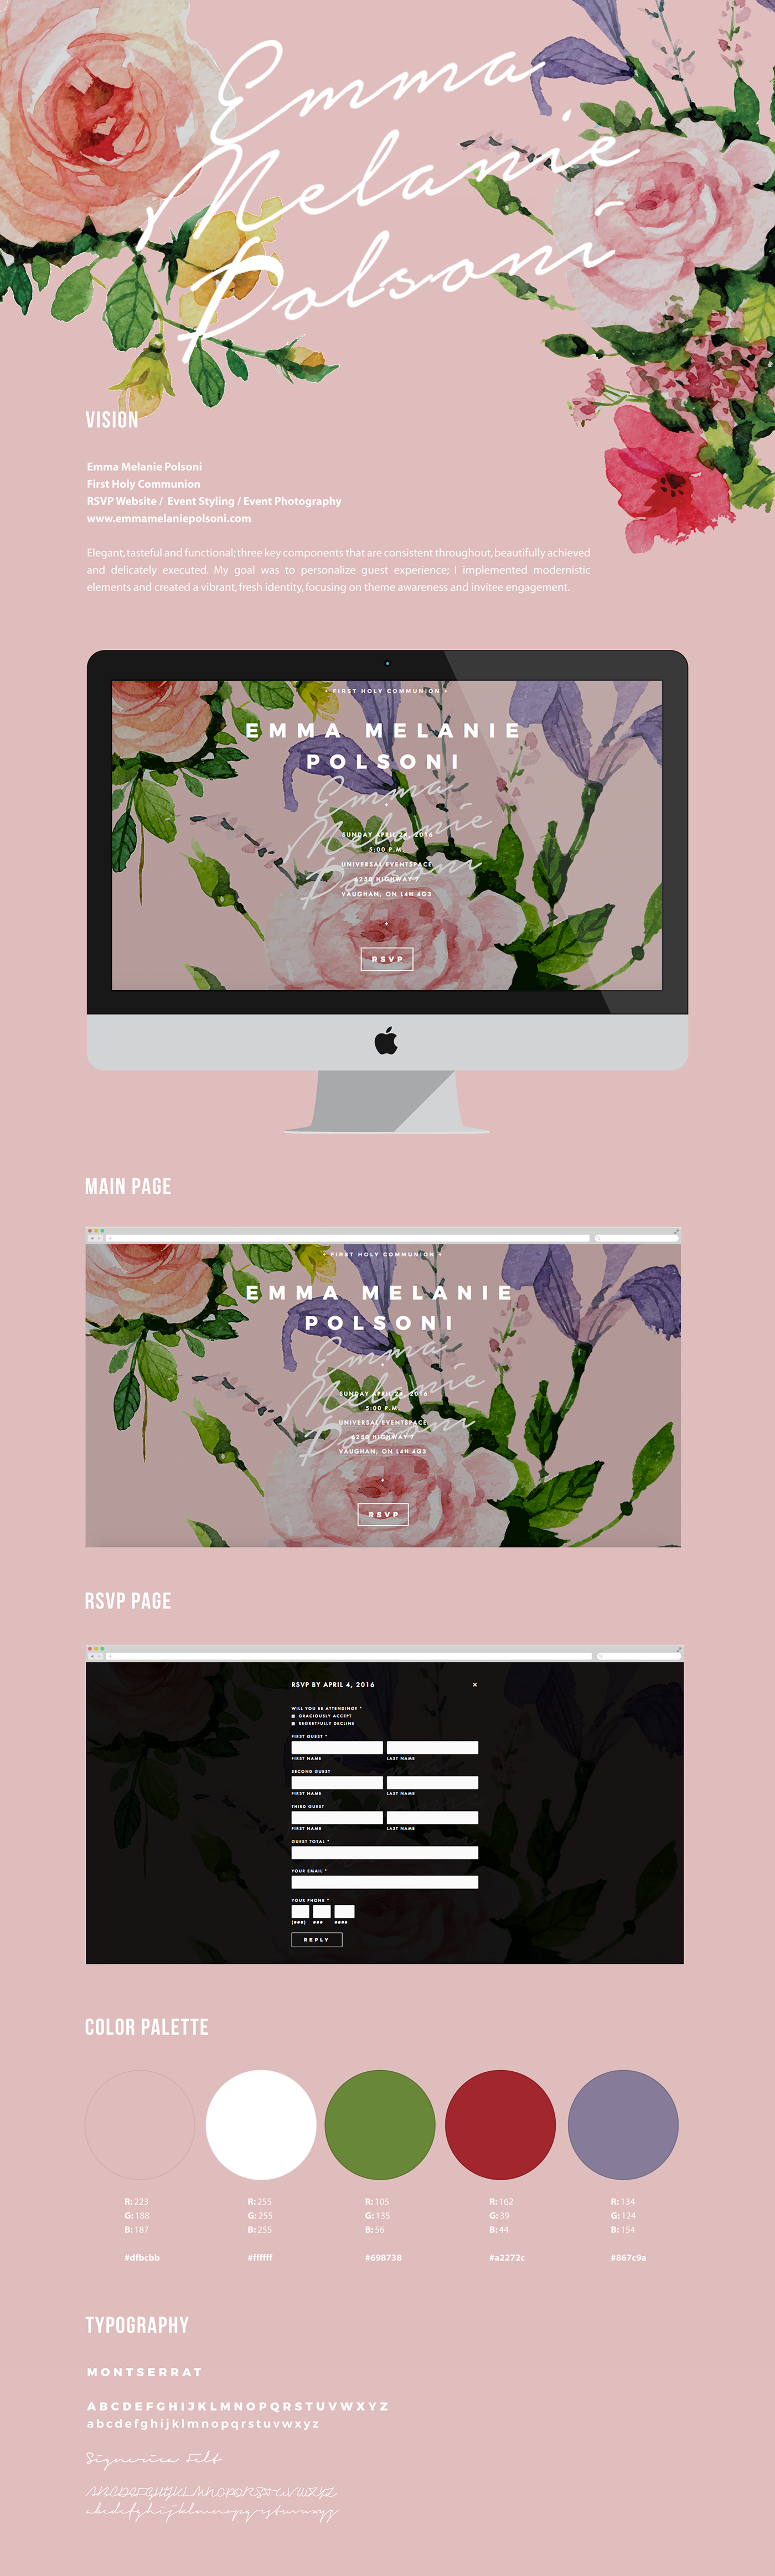 design Event styling  brand selfidentity Brainstorm execution awareness selfpromo Client Project floral florals Script creative